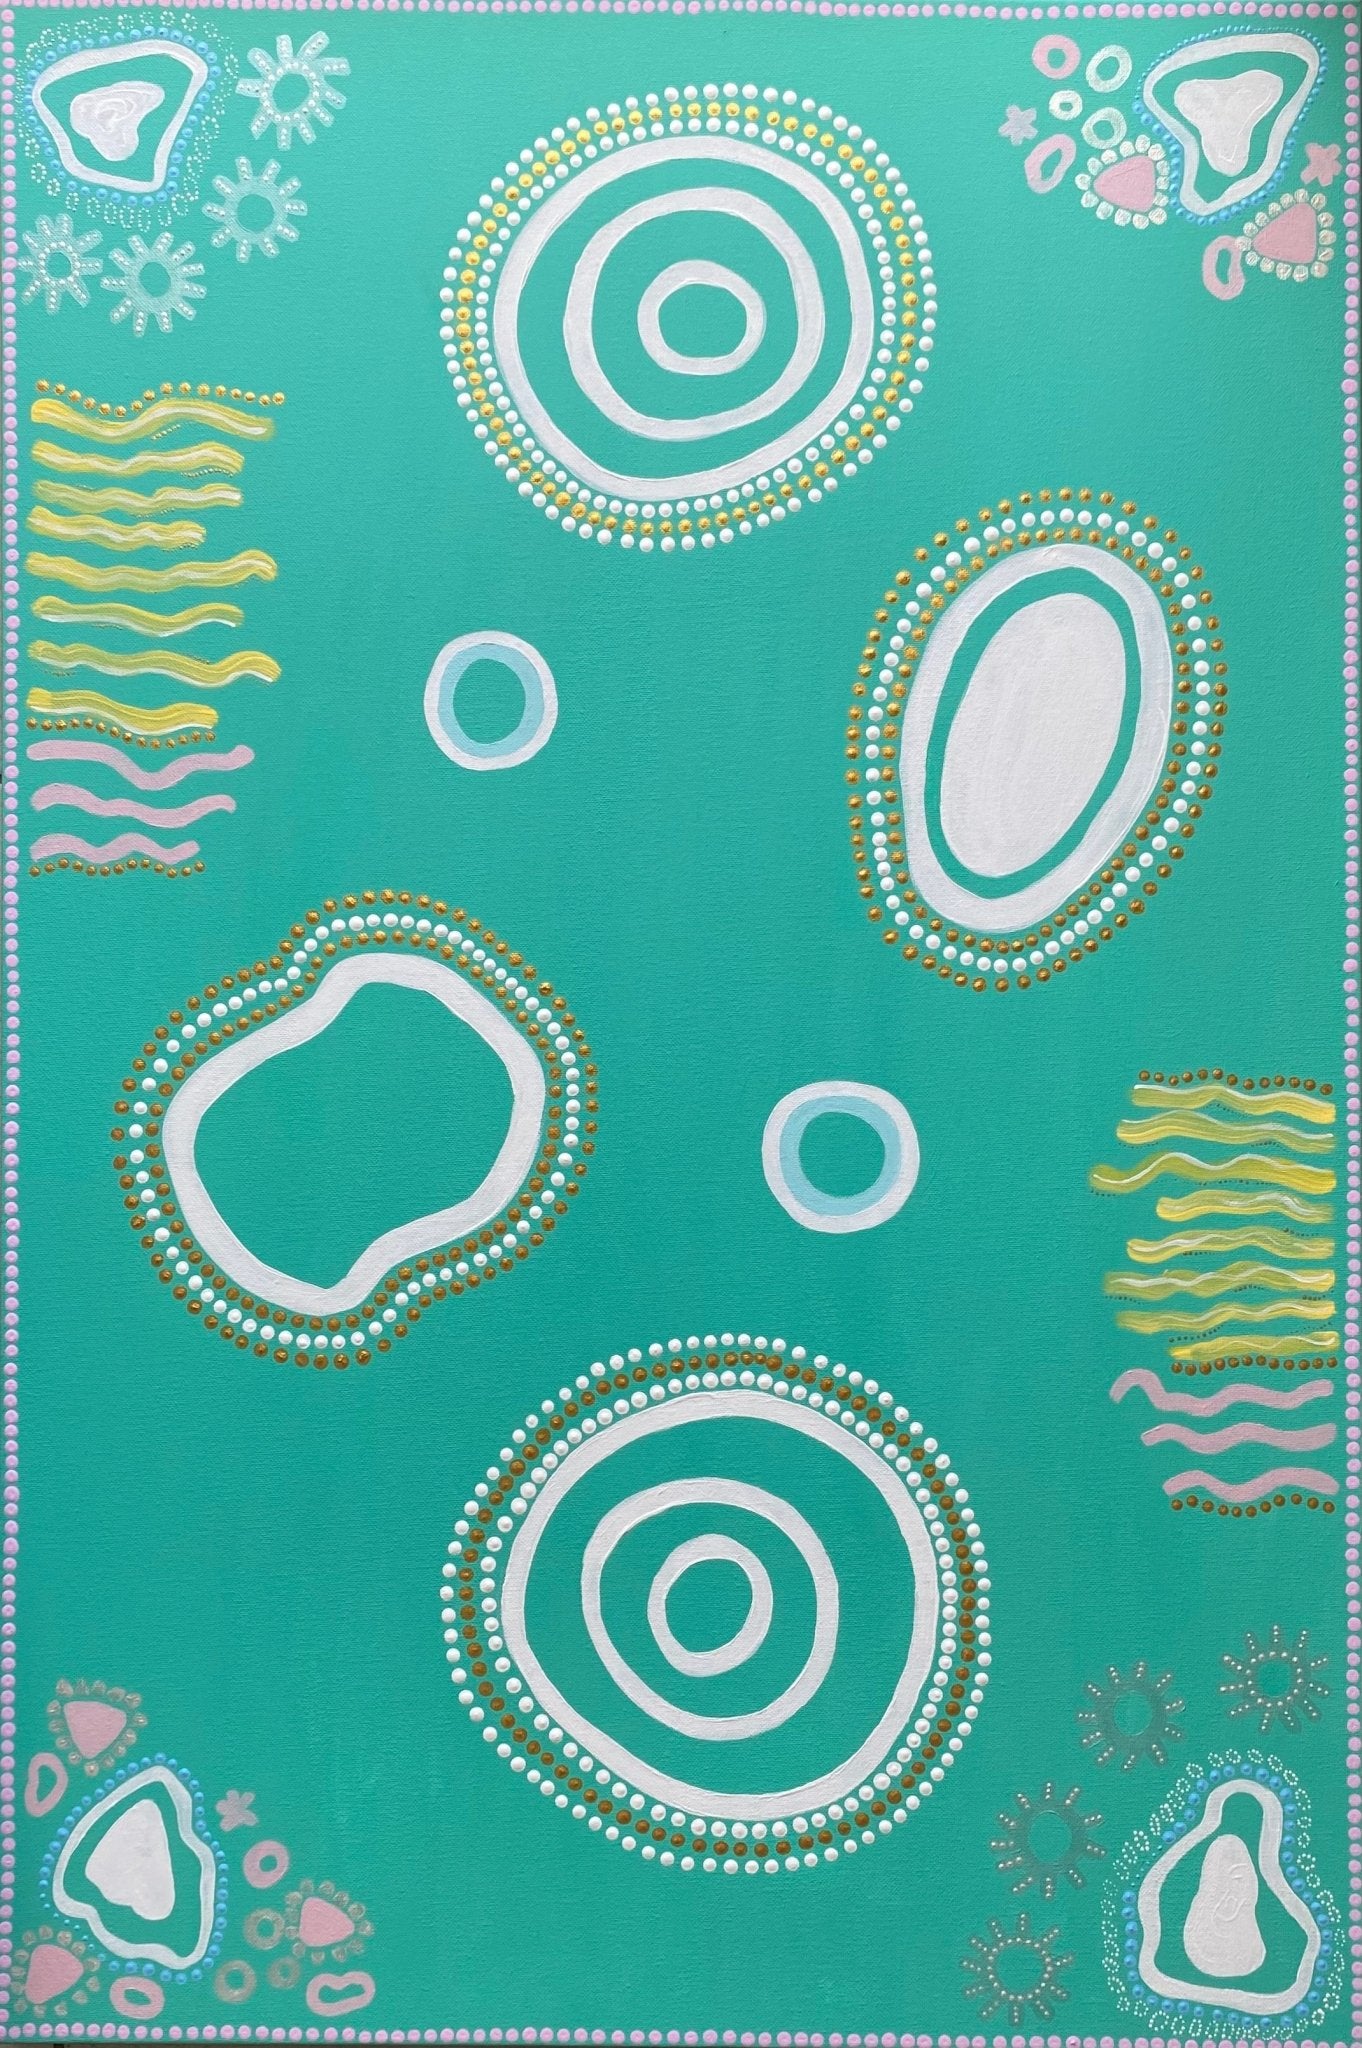 The Great Barrier Reef,Large canvas,Mulganai,